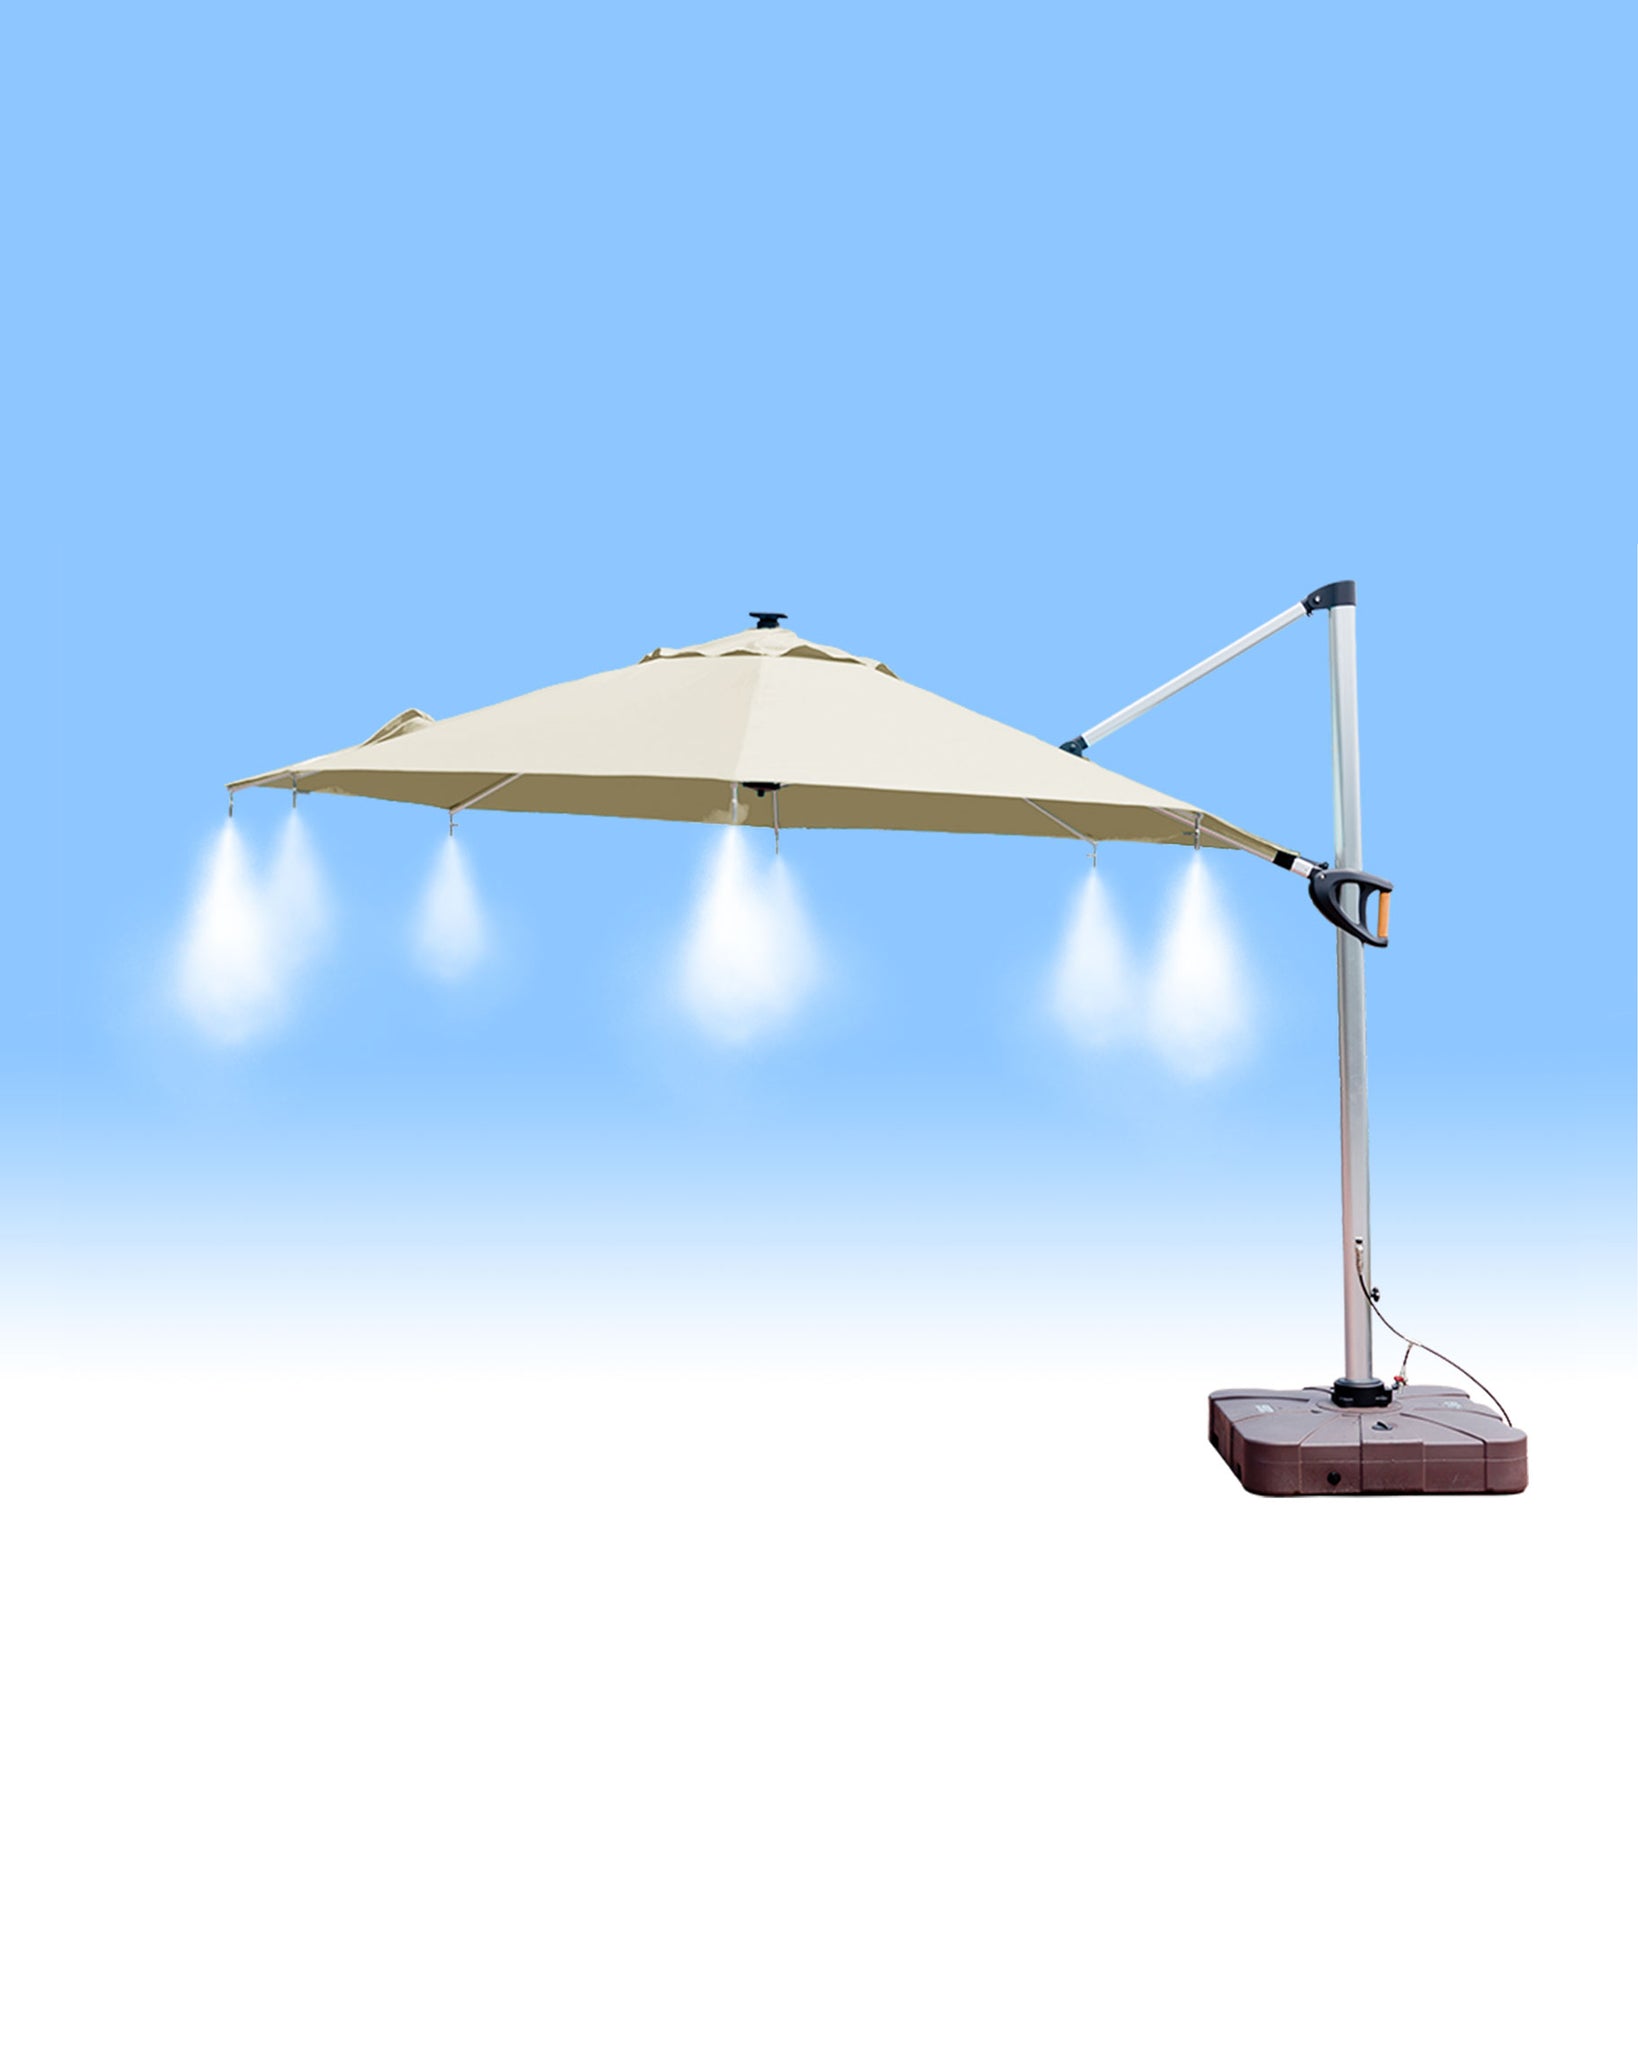 14 Nozzle High-Pressure Misting Umbrella with Pump and Stand